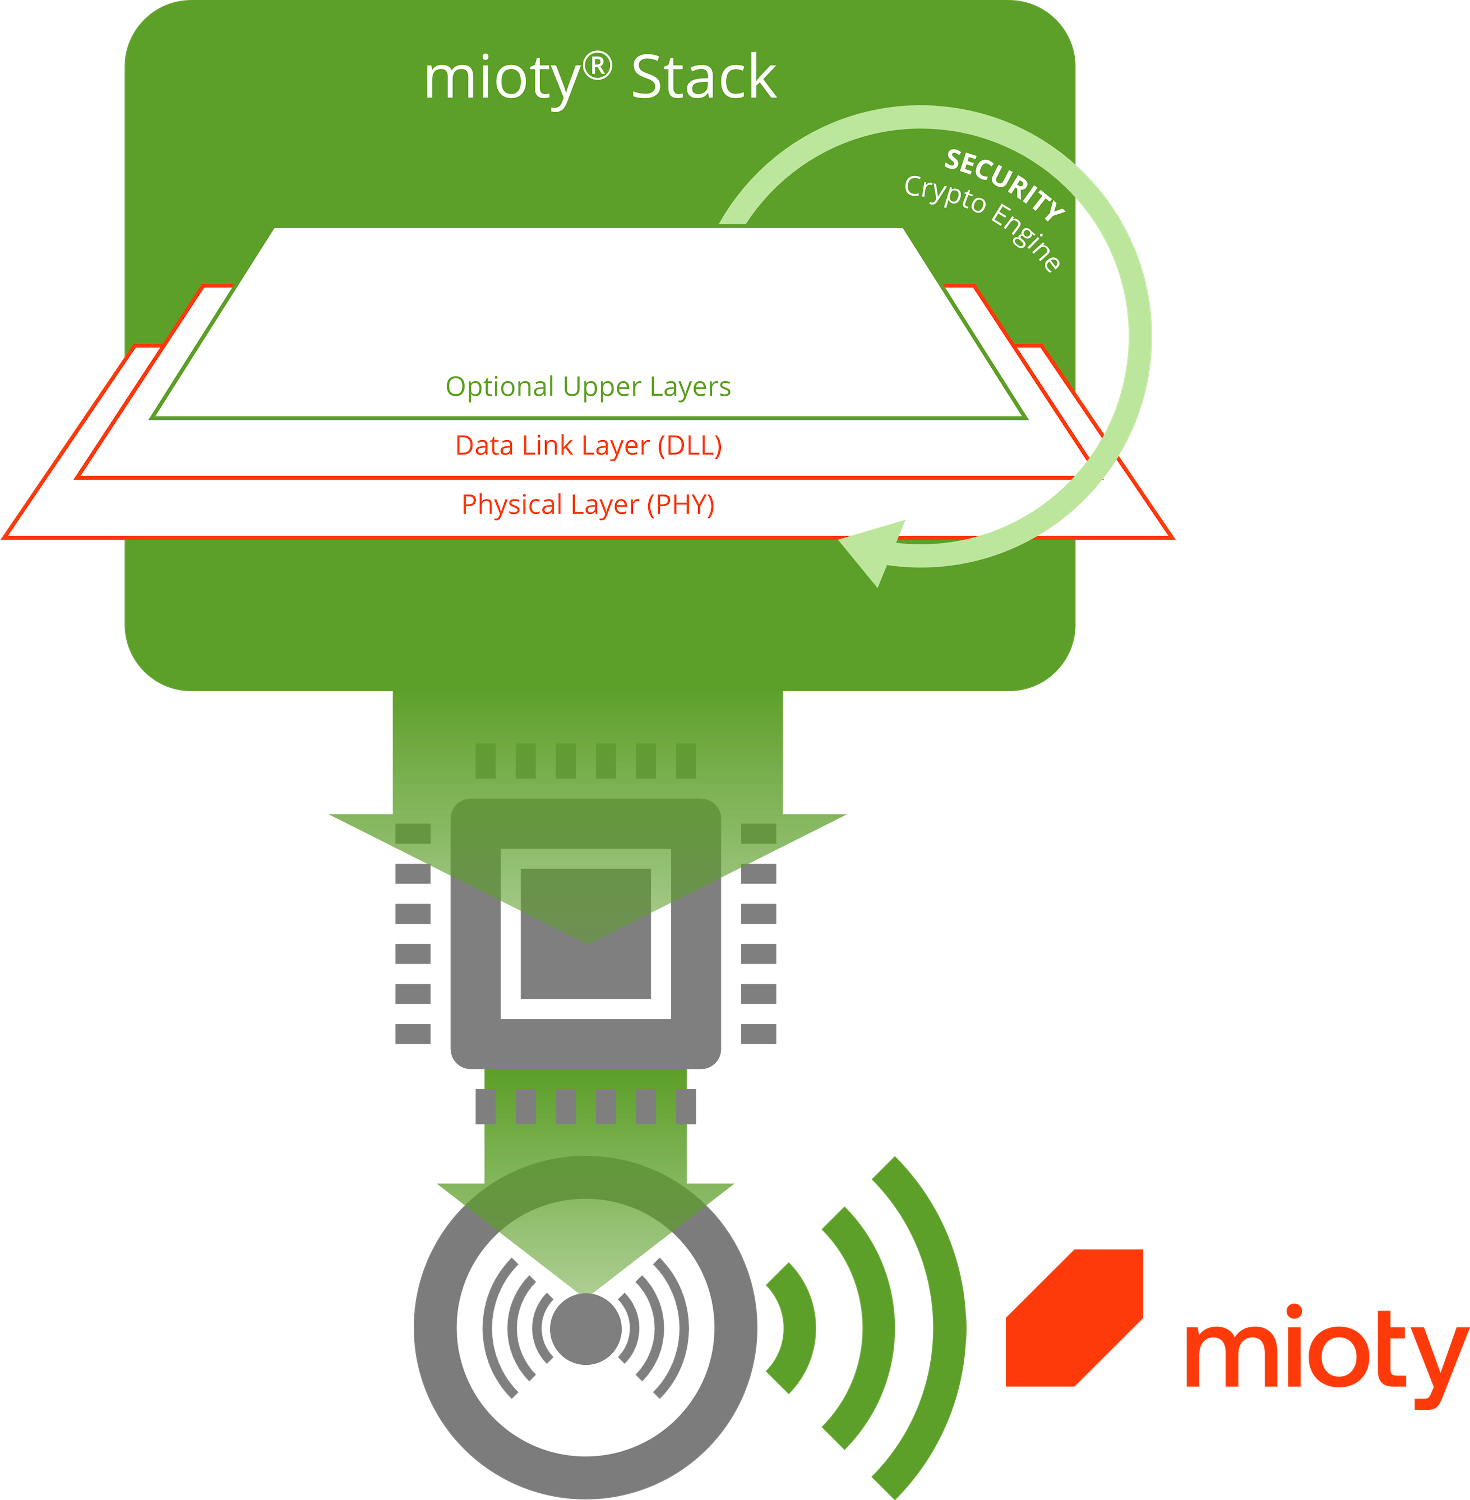 mioty Stack Architecture on hardware